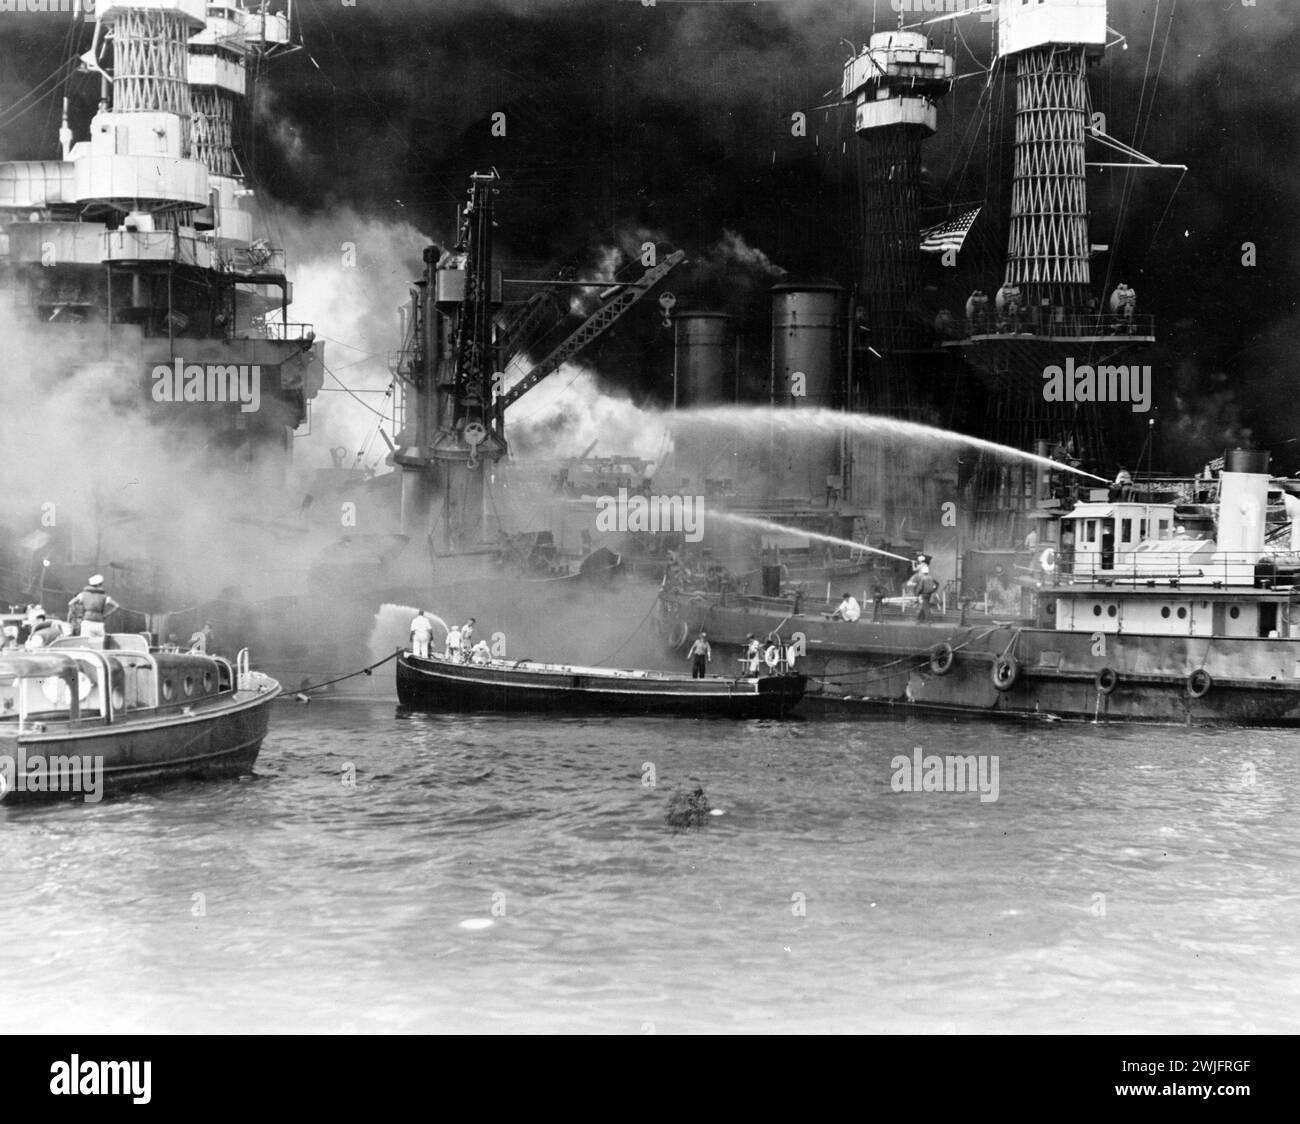 World War II - Pearl Harbor, Hawaii, Dec 7, 1941. USS West Virginia aflame. Disregarding the dangerous possibilities of explosions, US sailors man their boats at the side of the burning battleship to better fight the flames Stock Photo